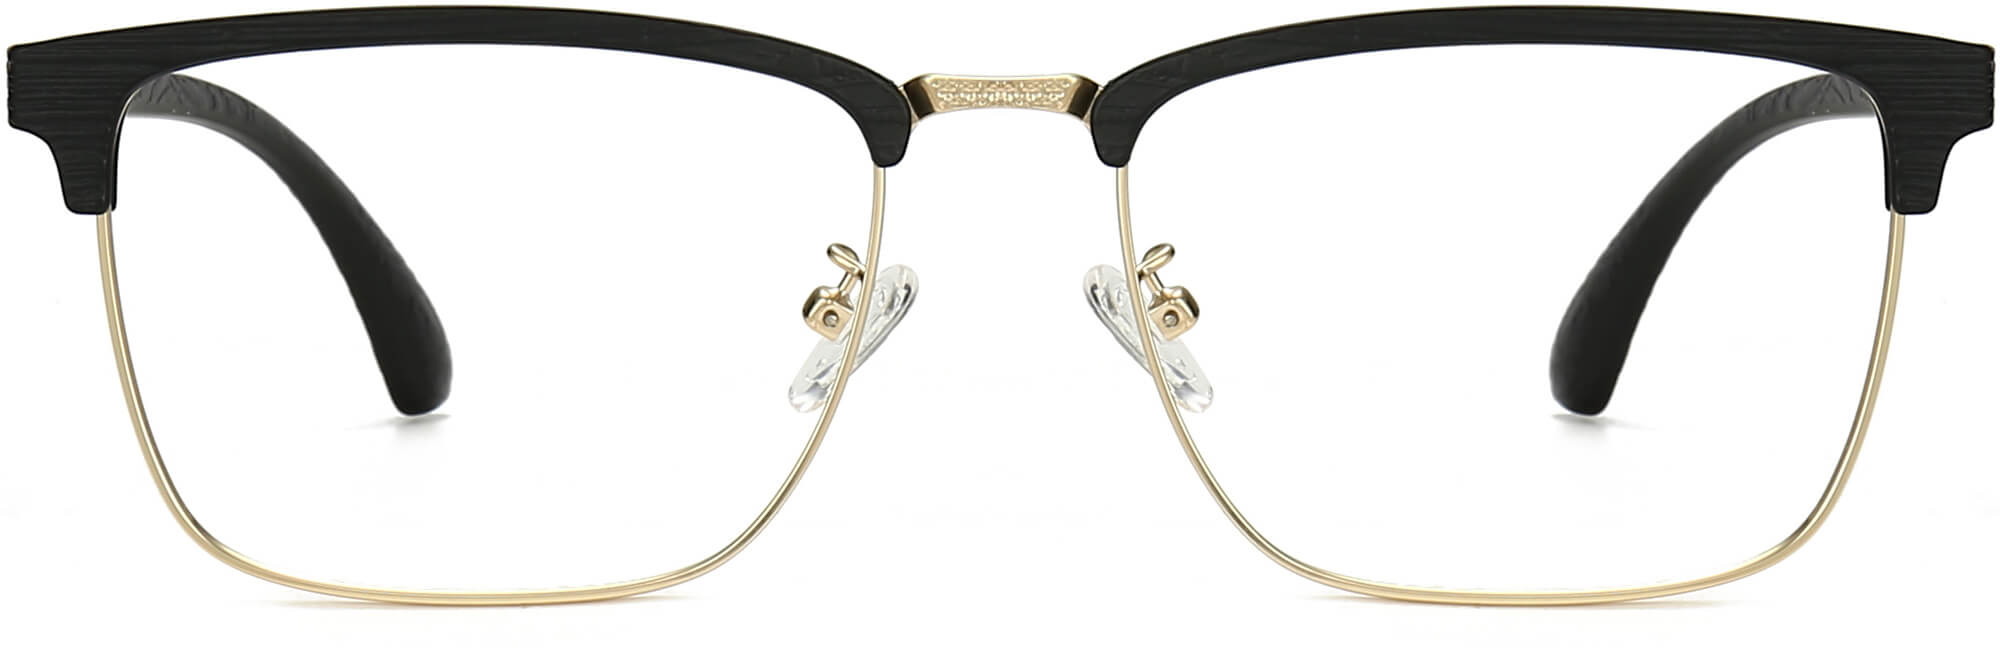 Ahmed Browline Black Eyeglasses from ANRRI, front view